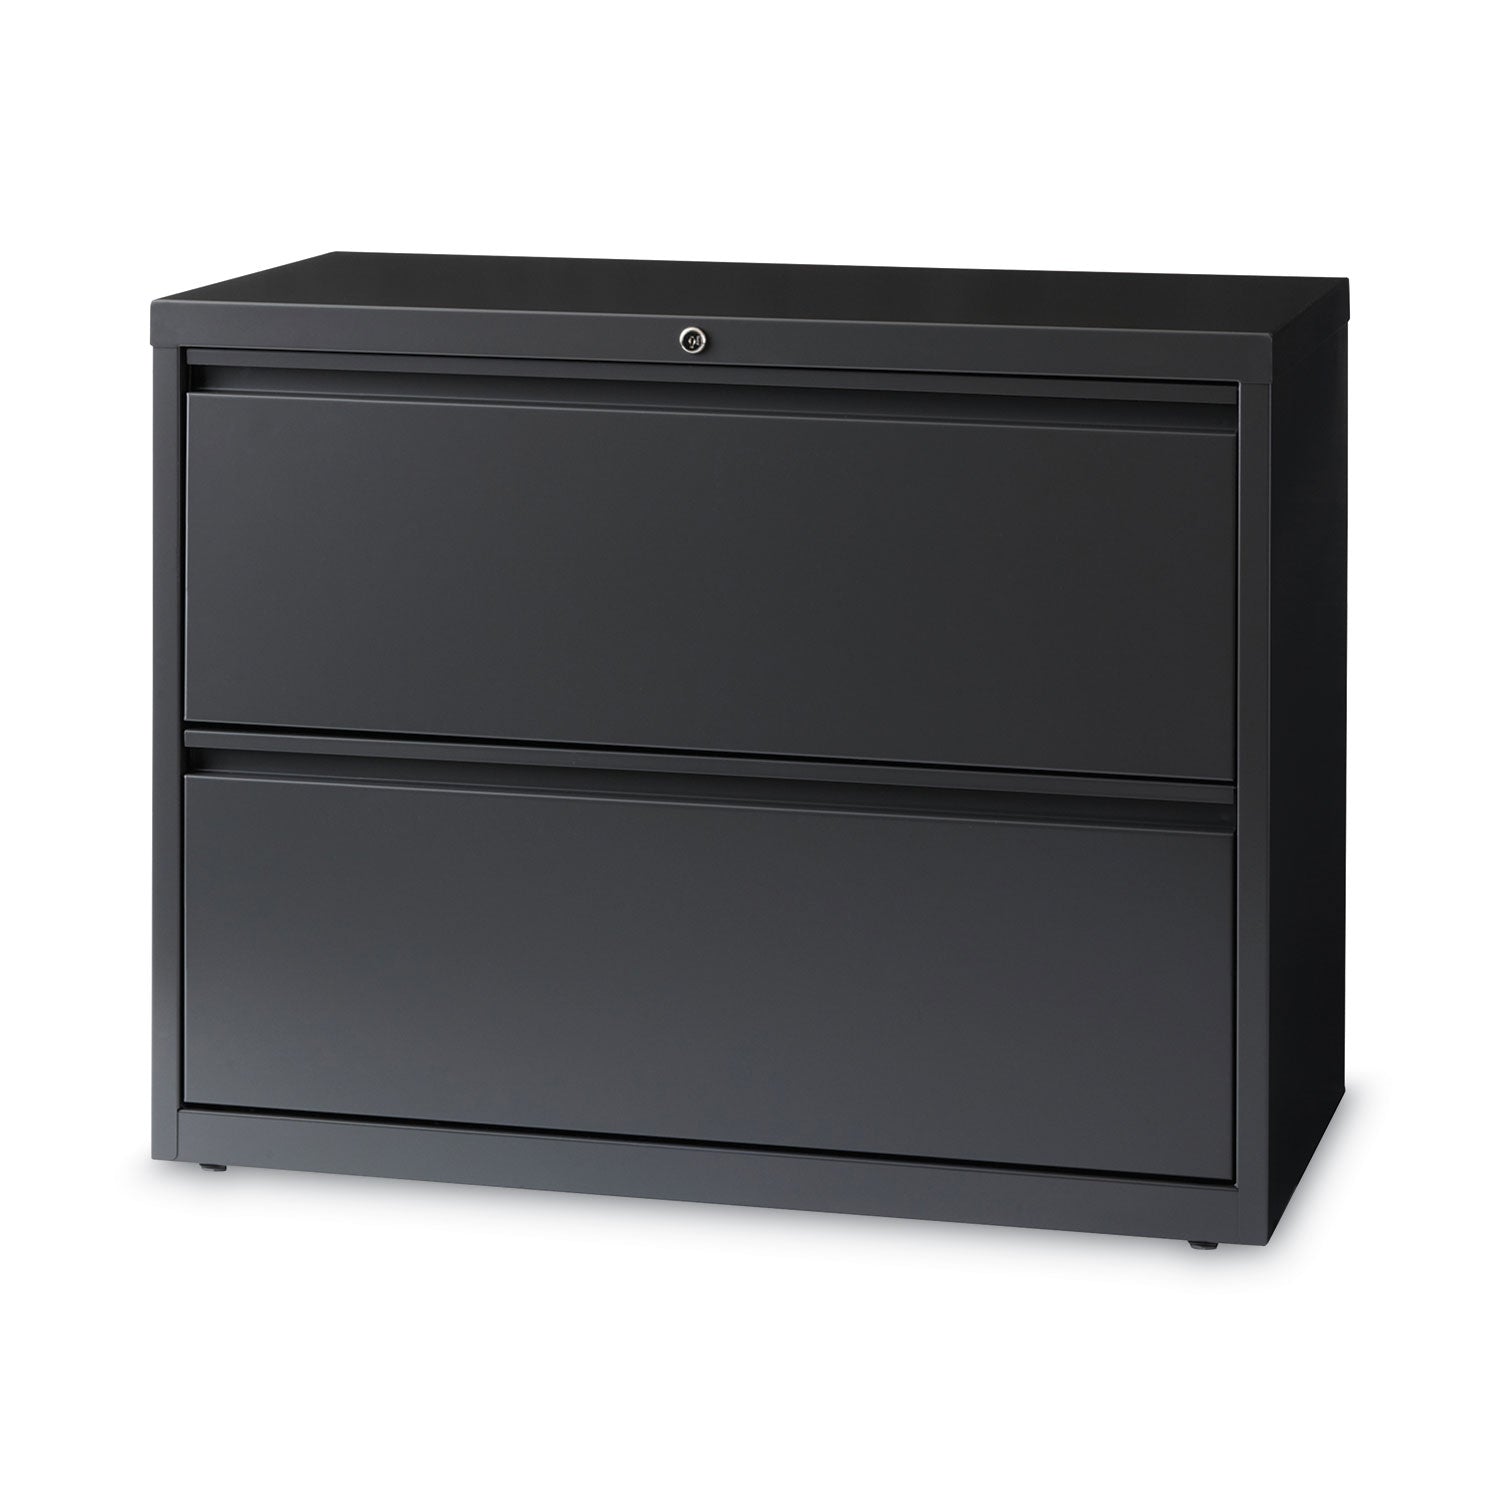 lateral-file-cabinet-2-letter-legal-a4-size-file-drawers-charcoal-36-x-1862-x-28_hid16065 - 2